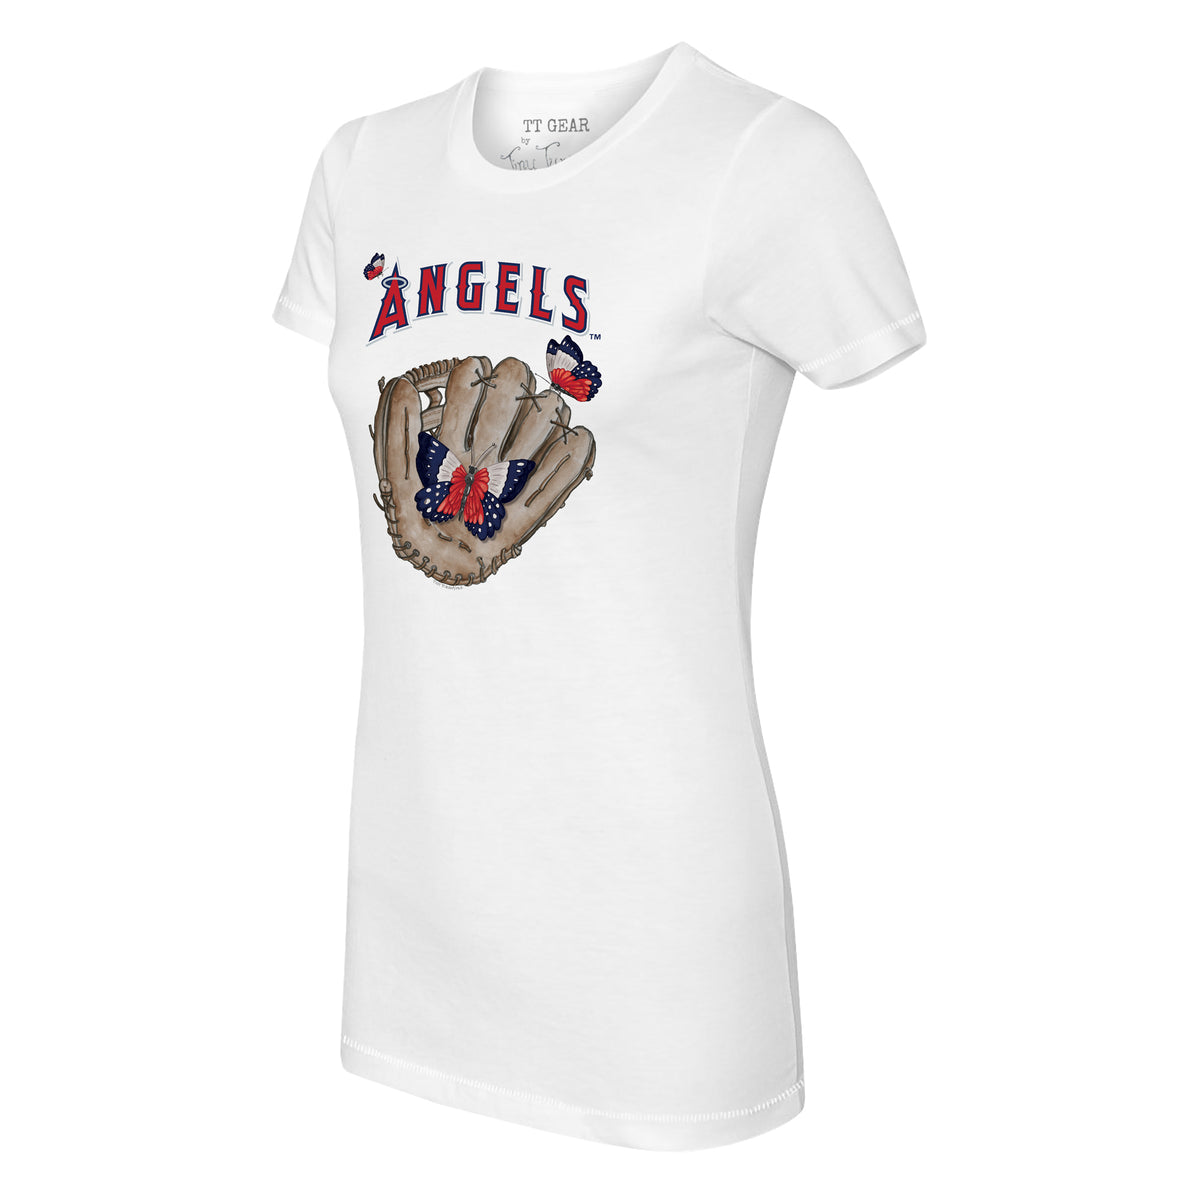 Los Angeles Angels Butterfly Glove Tee Shirt